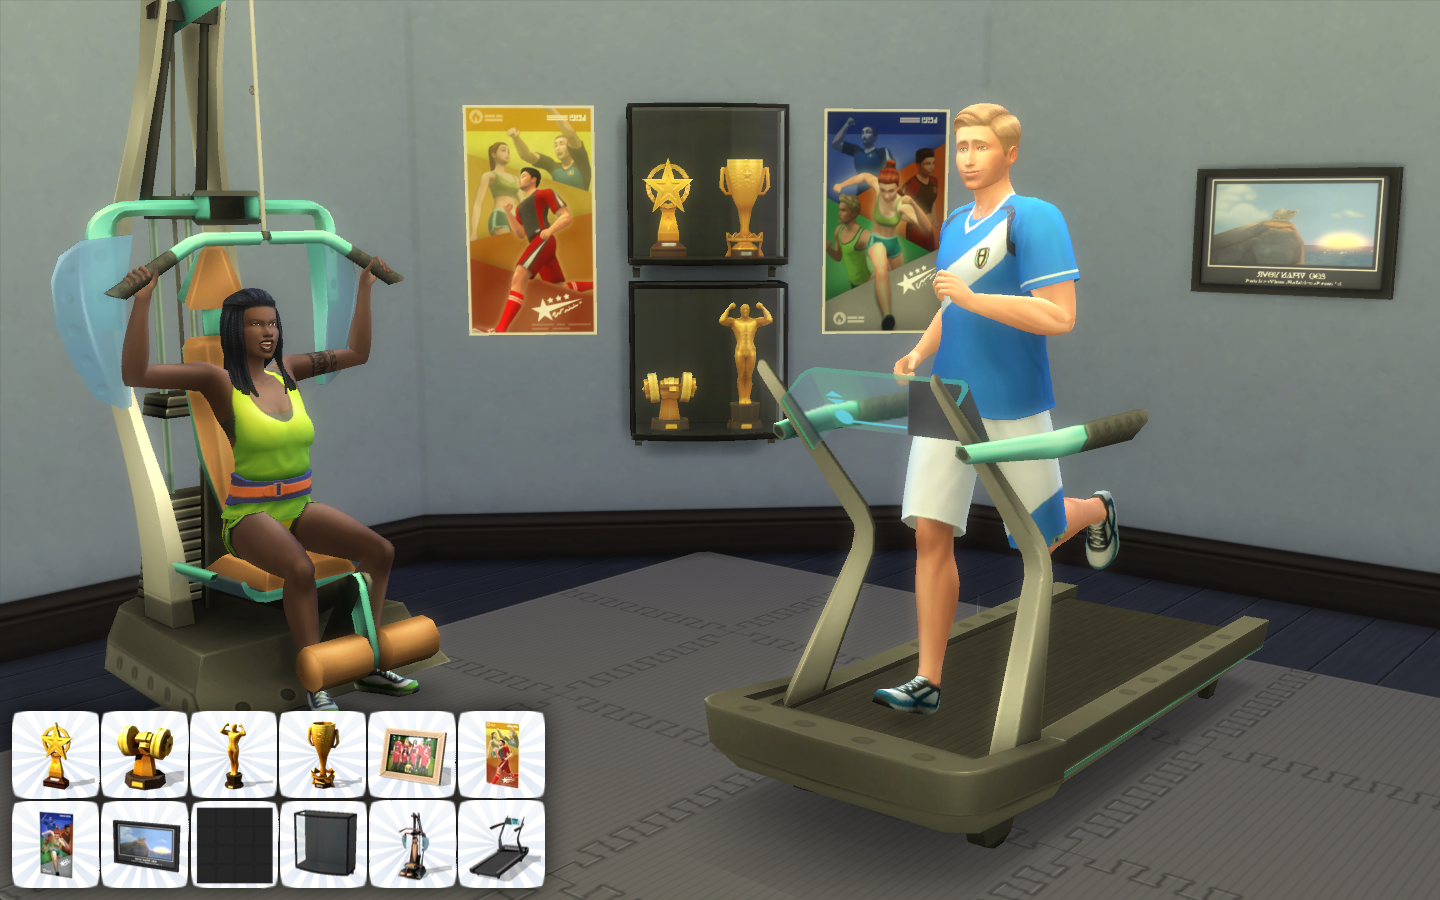 The Sims 4 Careers Update is Out! – simcitizens